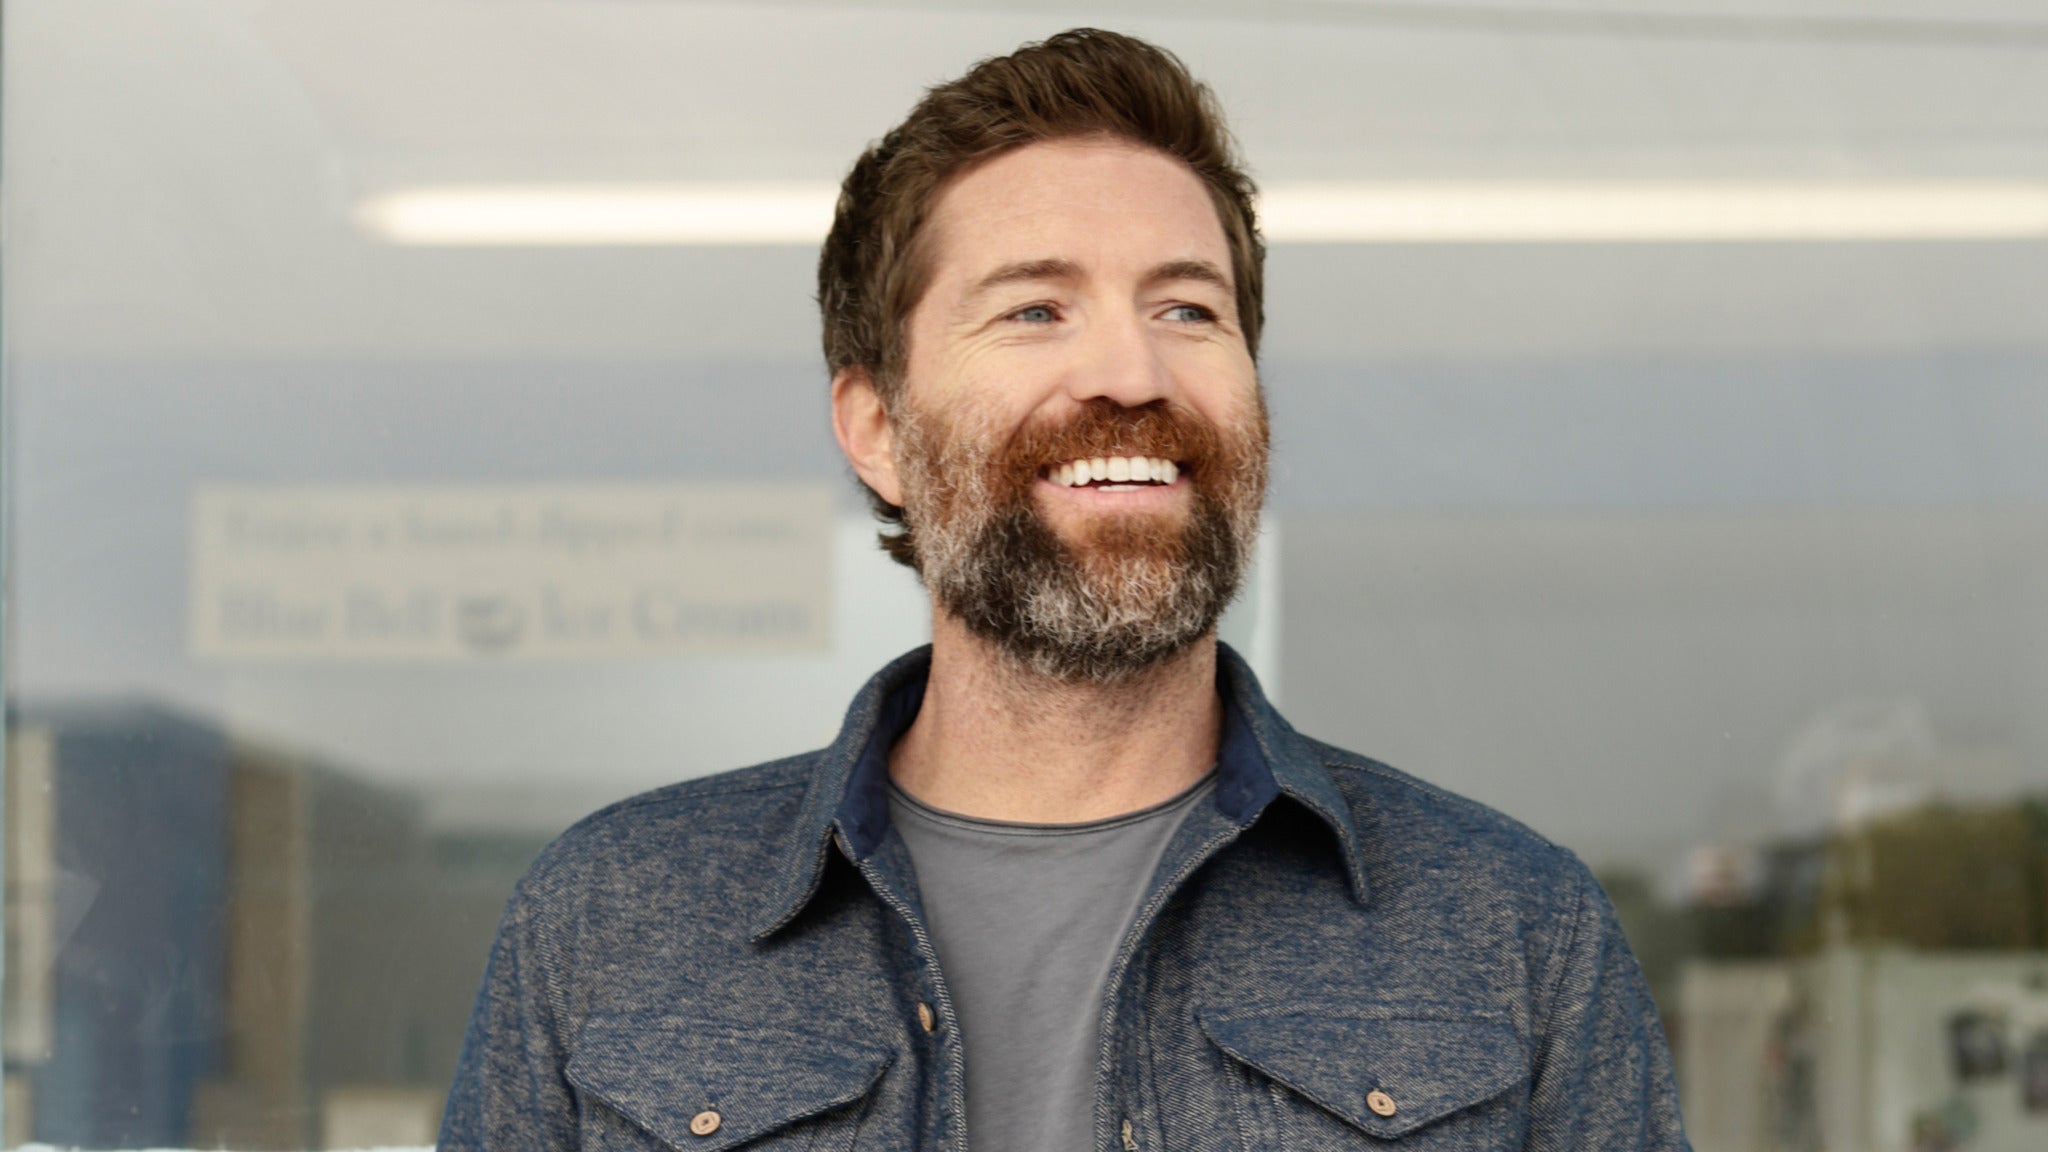 Josh Turner at Morrison Center for the Performing Arts - Boise, ID 83725